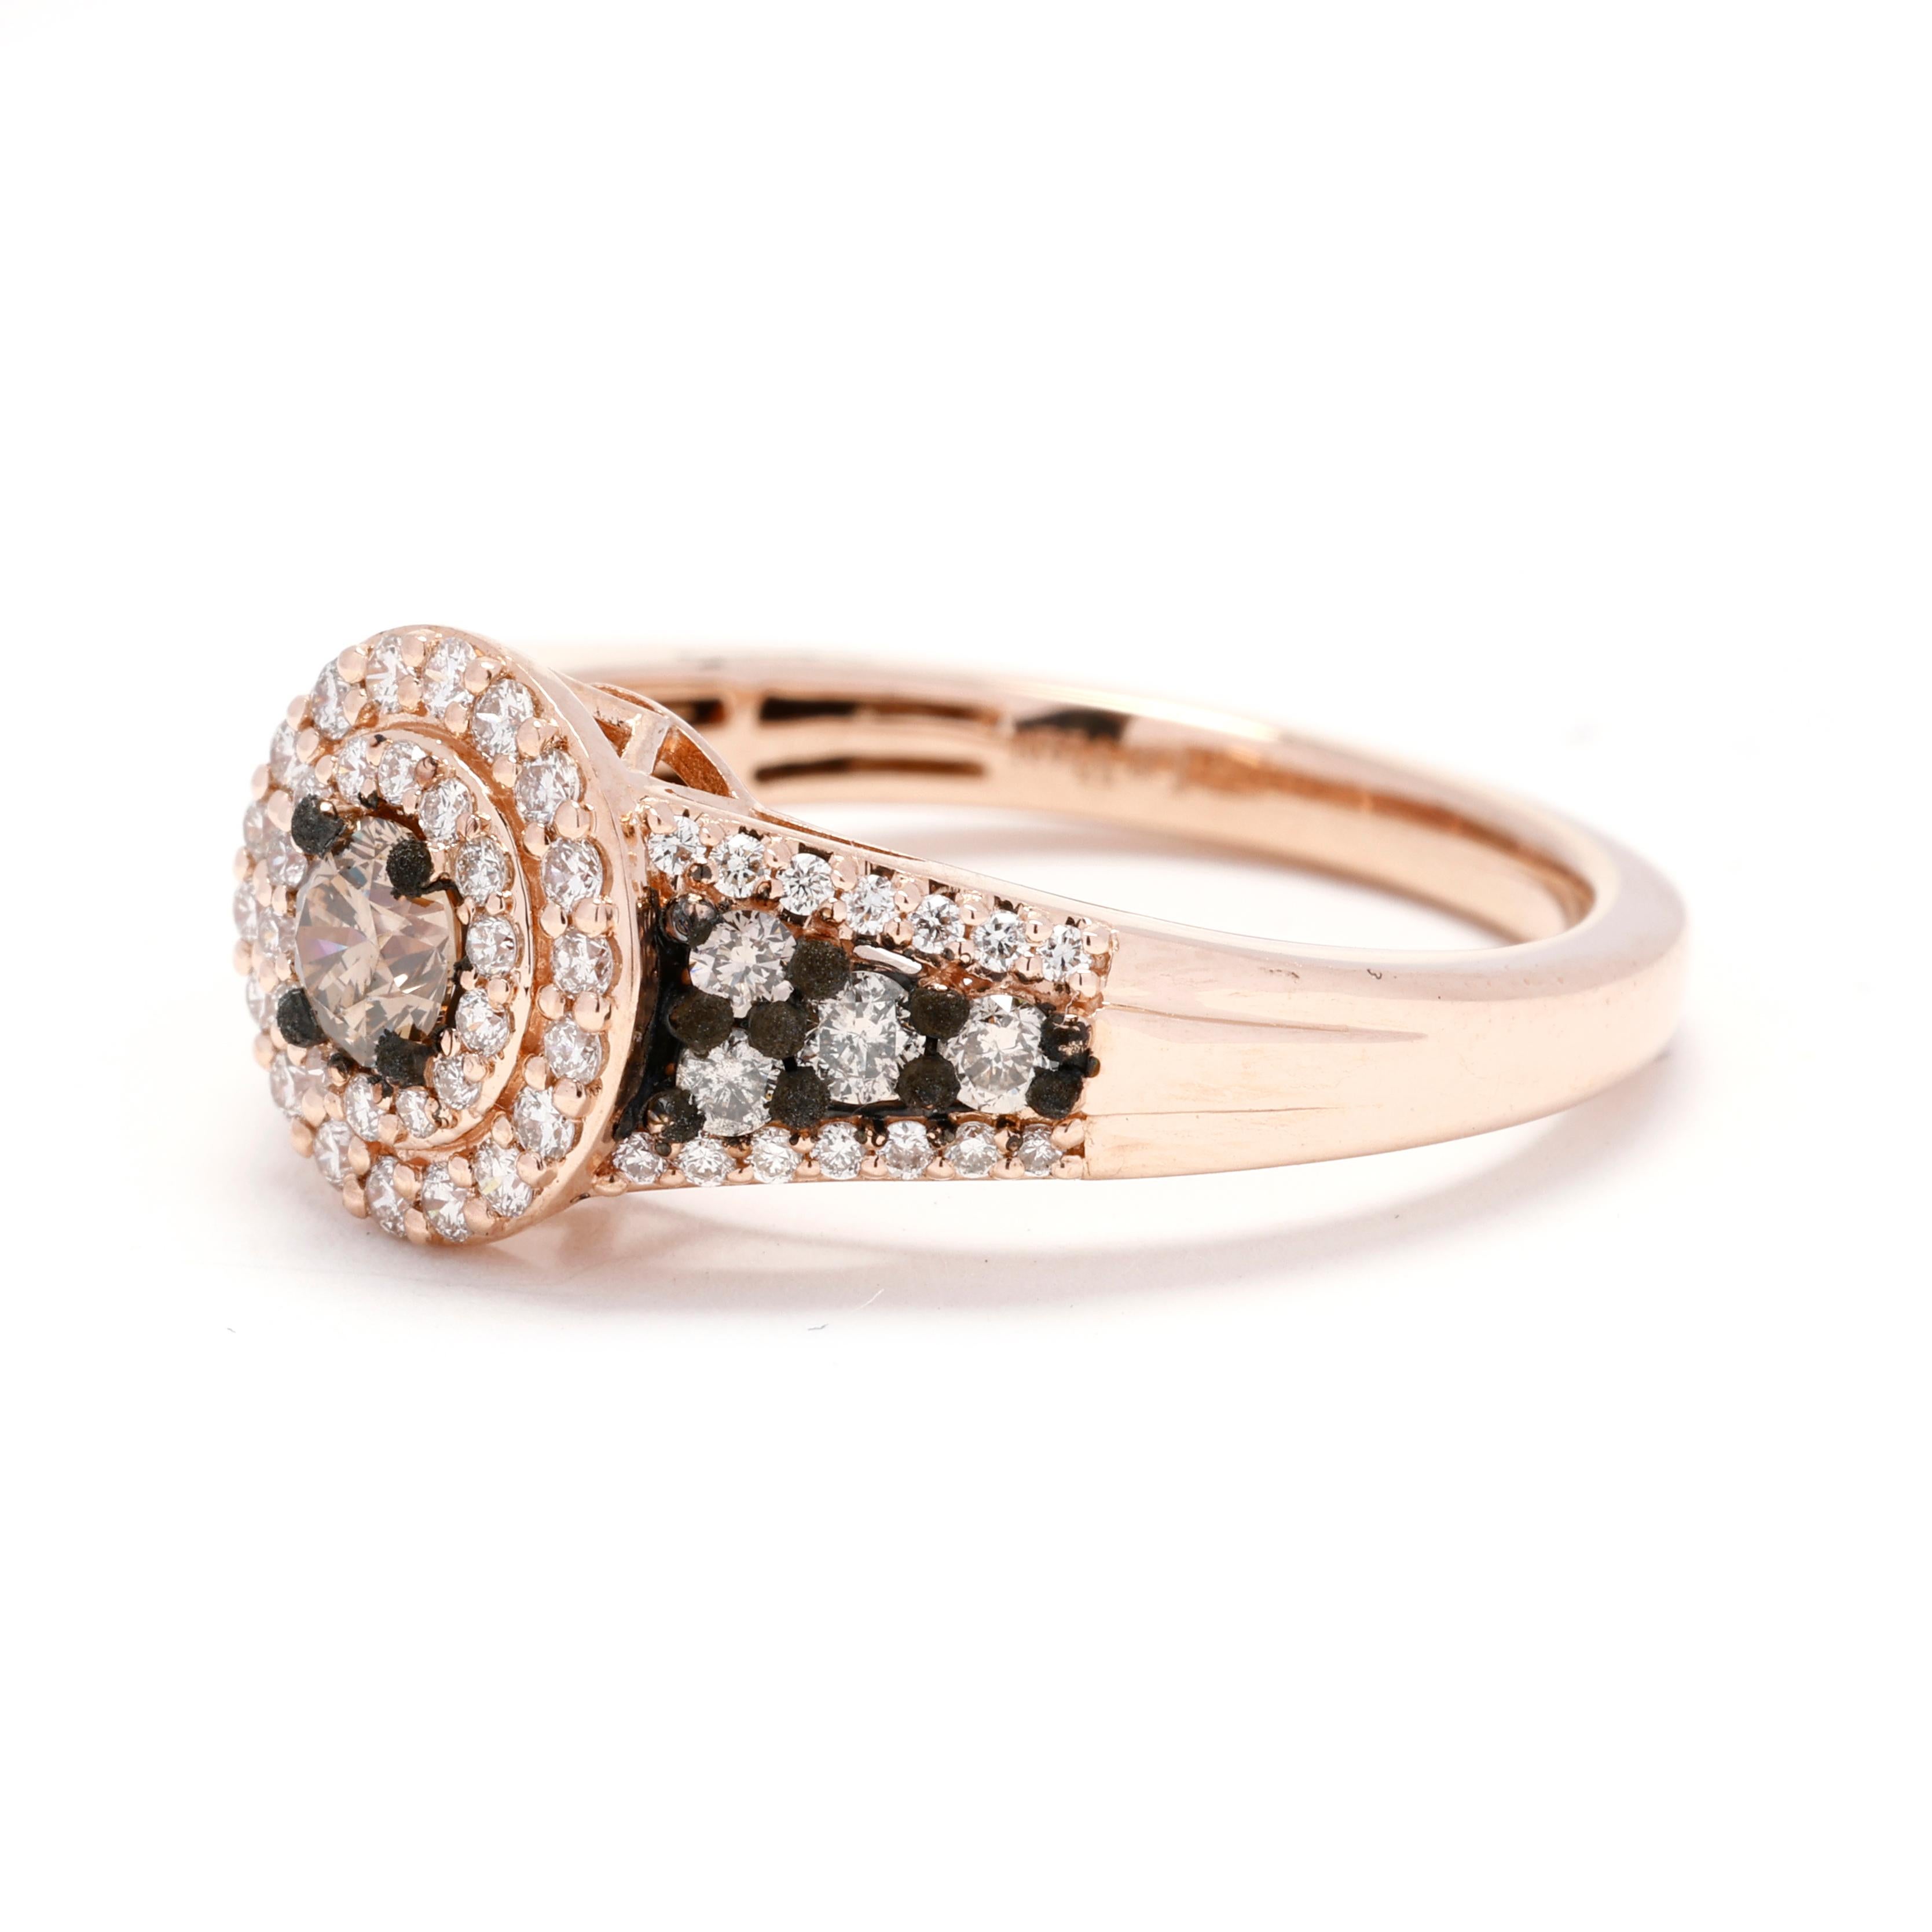 Make a bold statement of love with this stunning LeVian 0.85ctw Diamond Engagement Ring. Expertly crafted in romantic 14K rose gold, this mesmerizing ring features a breathtaking array of round brilliant diamonds set in a unique and eye-catching